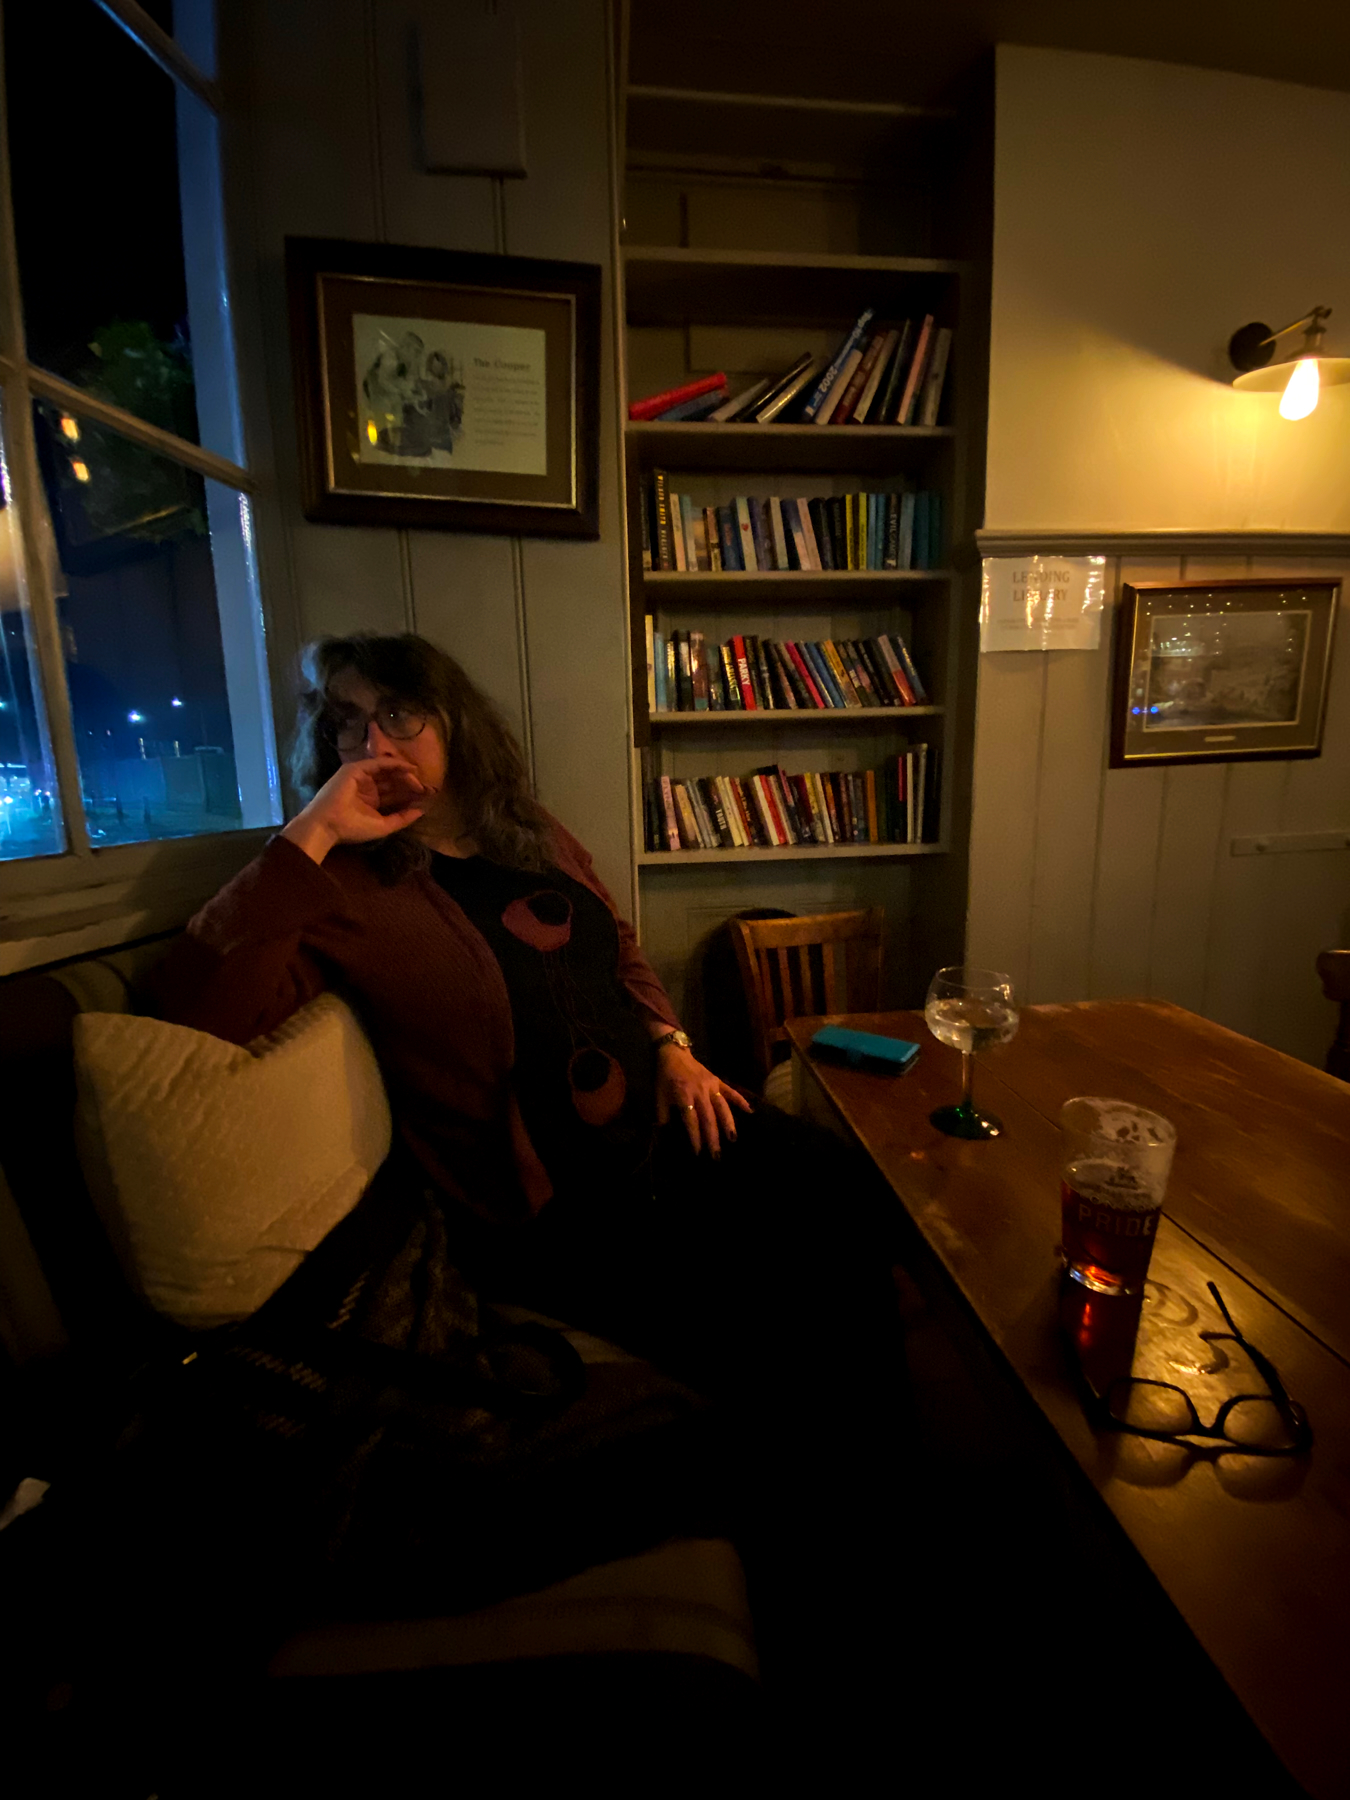 Drinks on a table in a dimly lit pub, bookshelves in the background